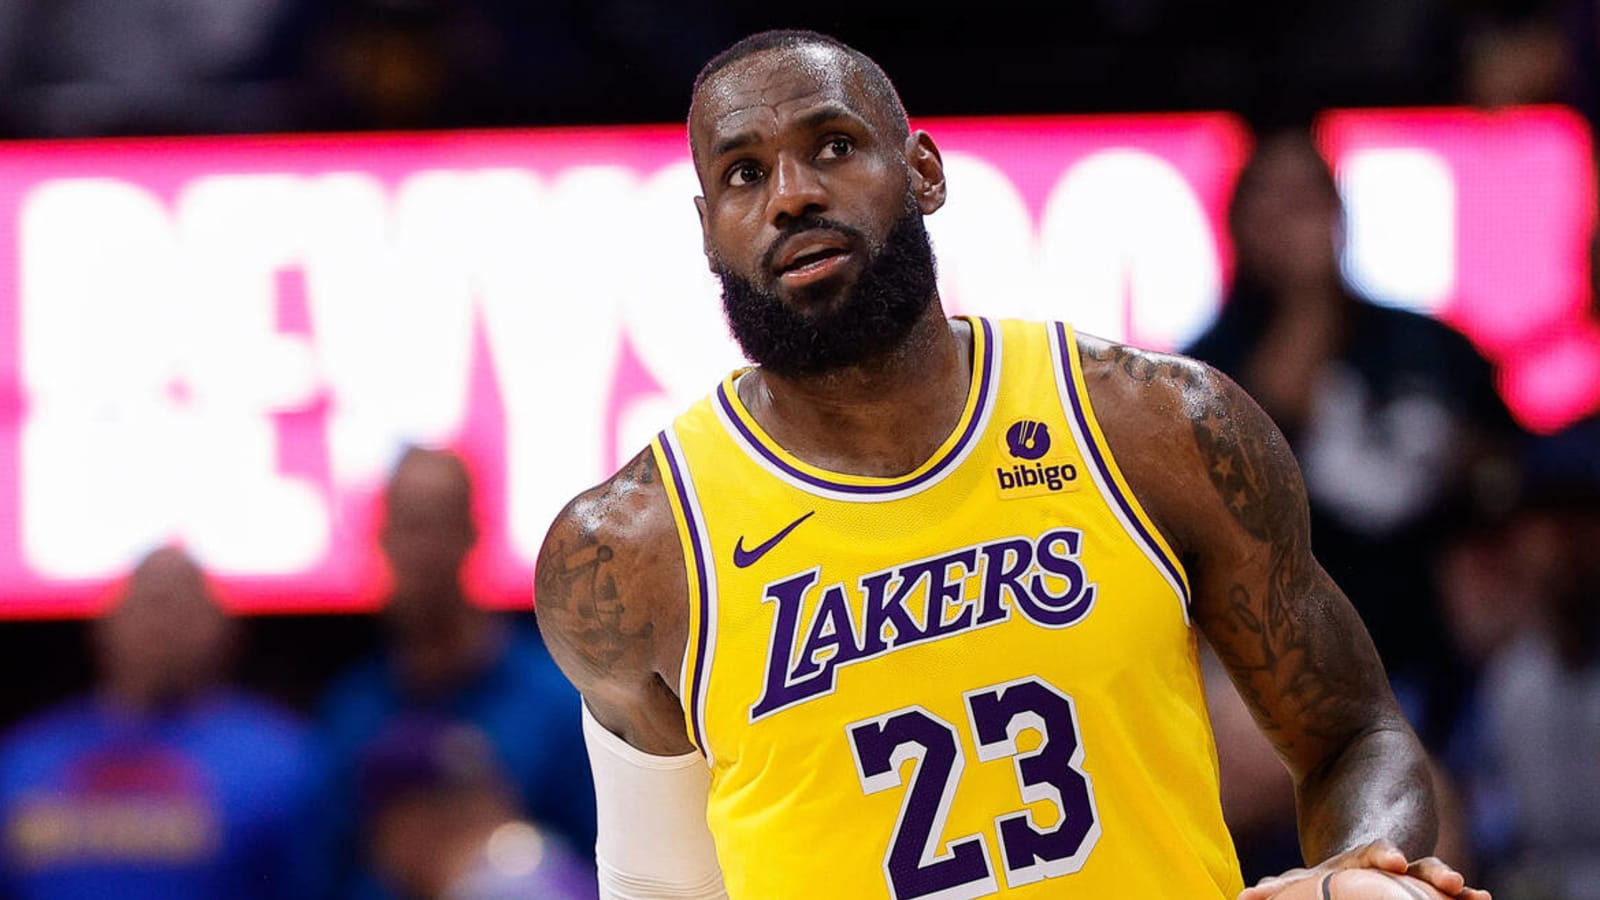 LeBron James declines to say if he played his last game with Lakers